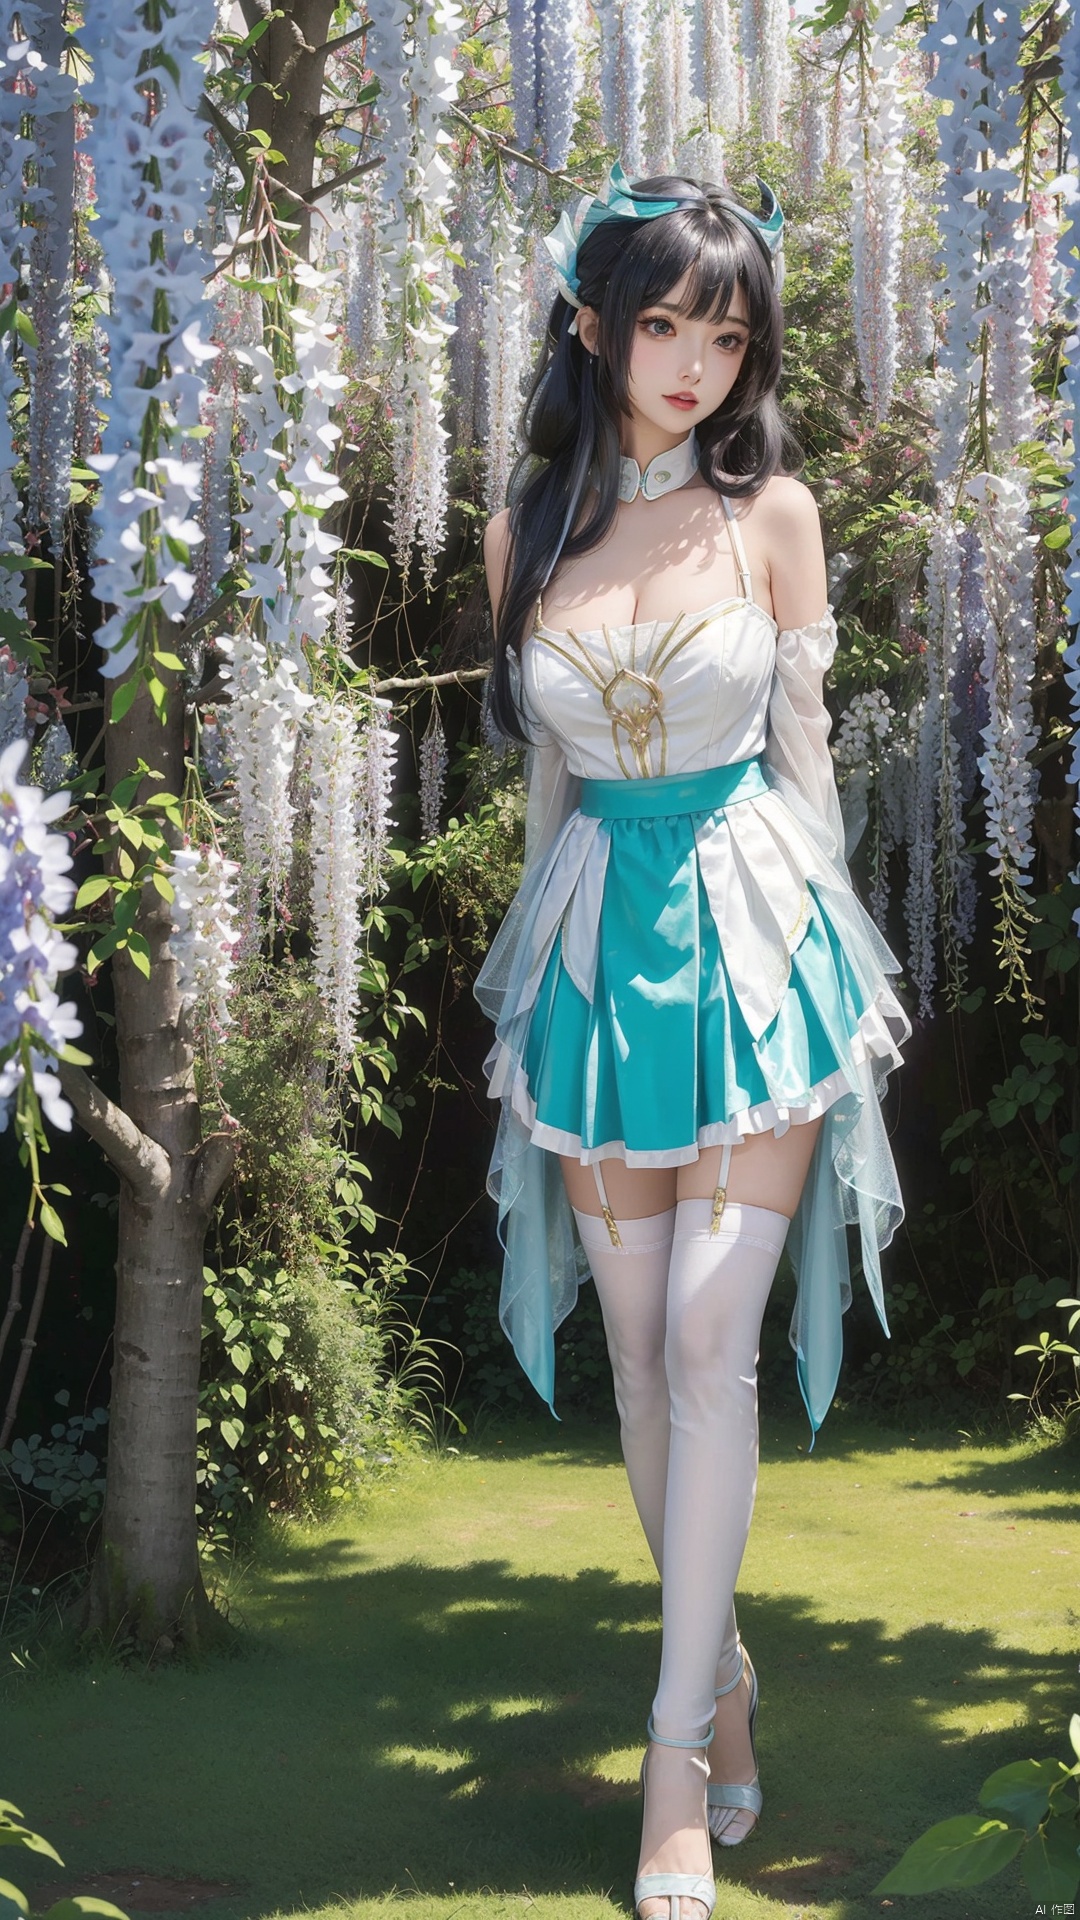  (tree: 1.2), (1girl: 1.2), (nature: 1.1), (long_hair), (forest), outdoors, black_hair, solo, bush, standing, day, blue_skirt, dappled_sunlight, grass, jewelry, water, skirt, sunlight, leg_up, bare_tree, wisteria, very_long_hair, tree_shade, bangs, walking, ribbon, garden, a girl,white stockings,dress,(hidden hands),(arms behind back),(strappy heels),cleavage,huge brrasts,